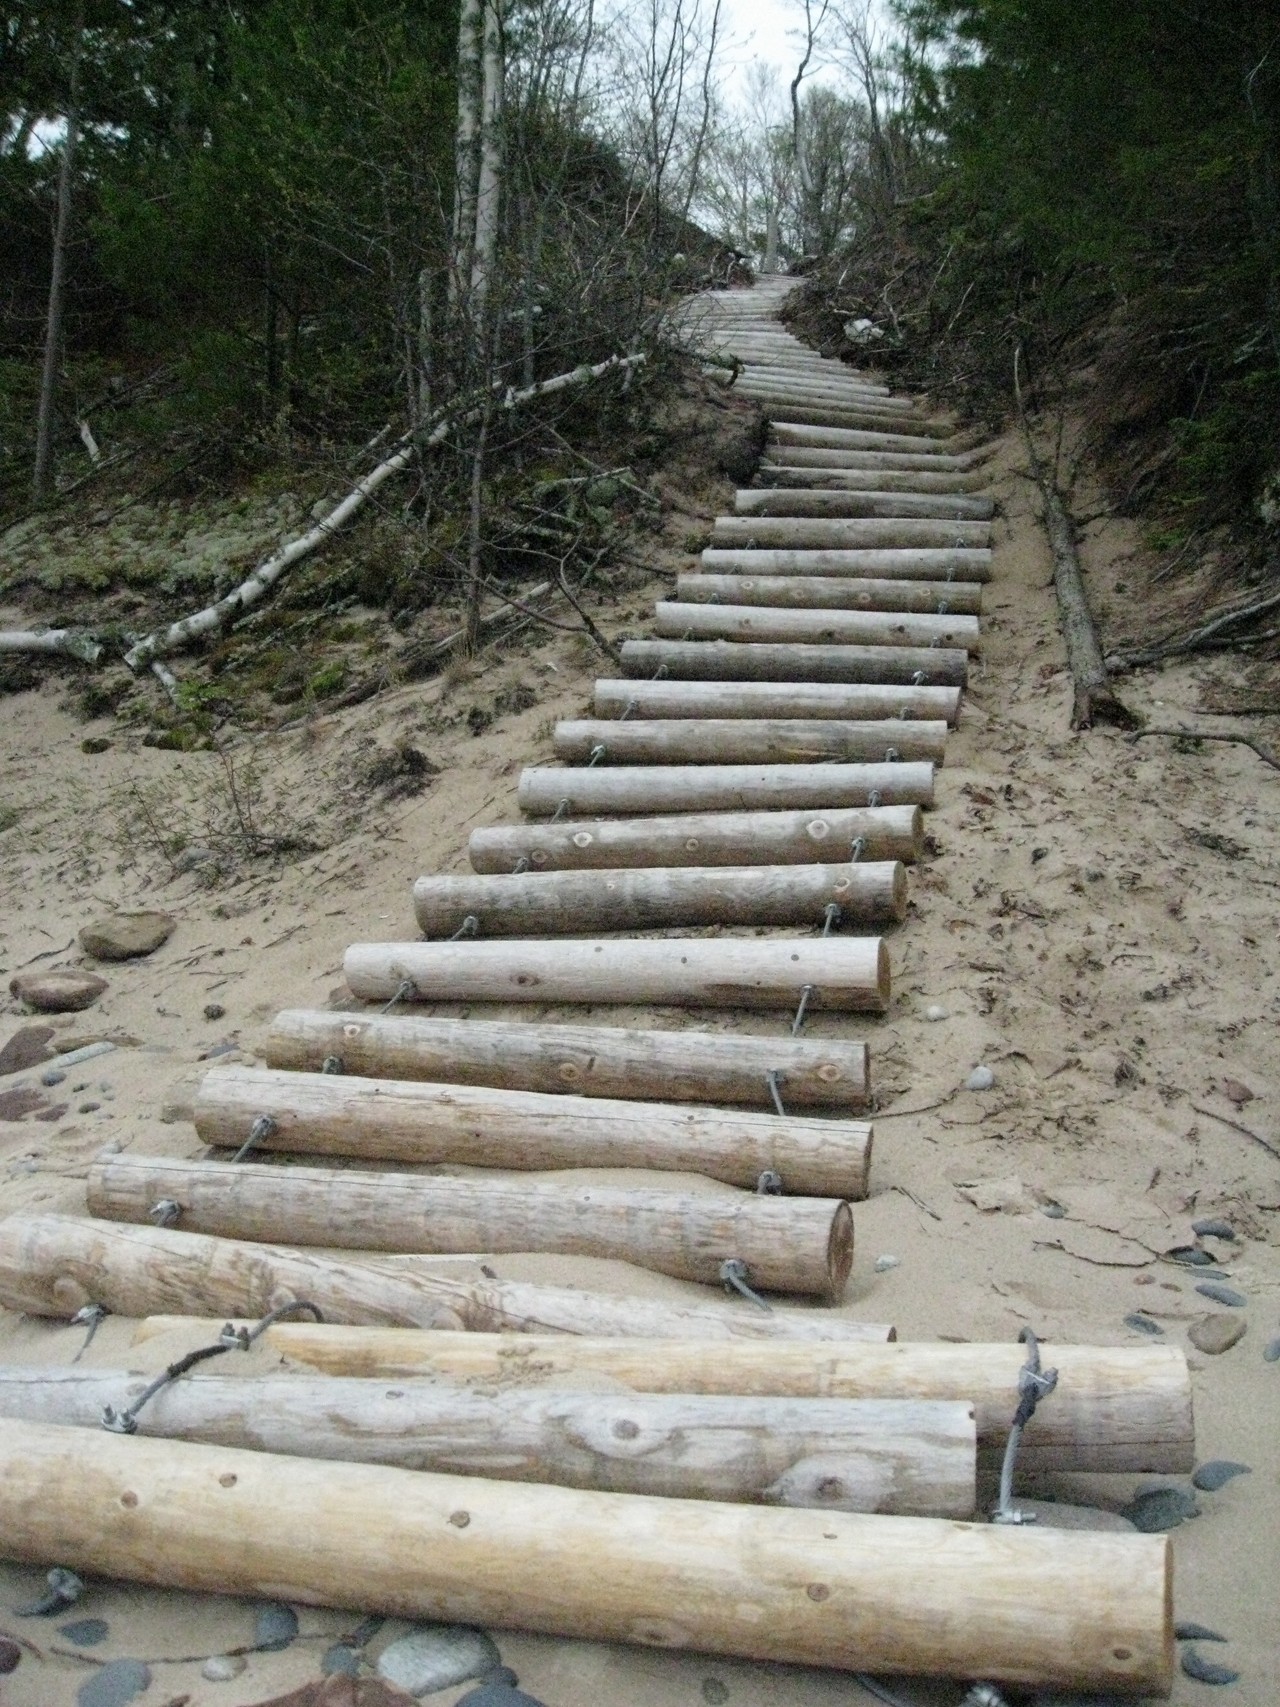 This rough stair of logs ascends to the Au Sable Point Light. Atop the stairs, a building had a defib kit!